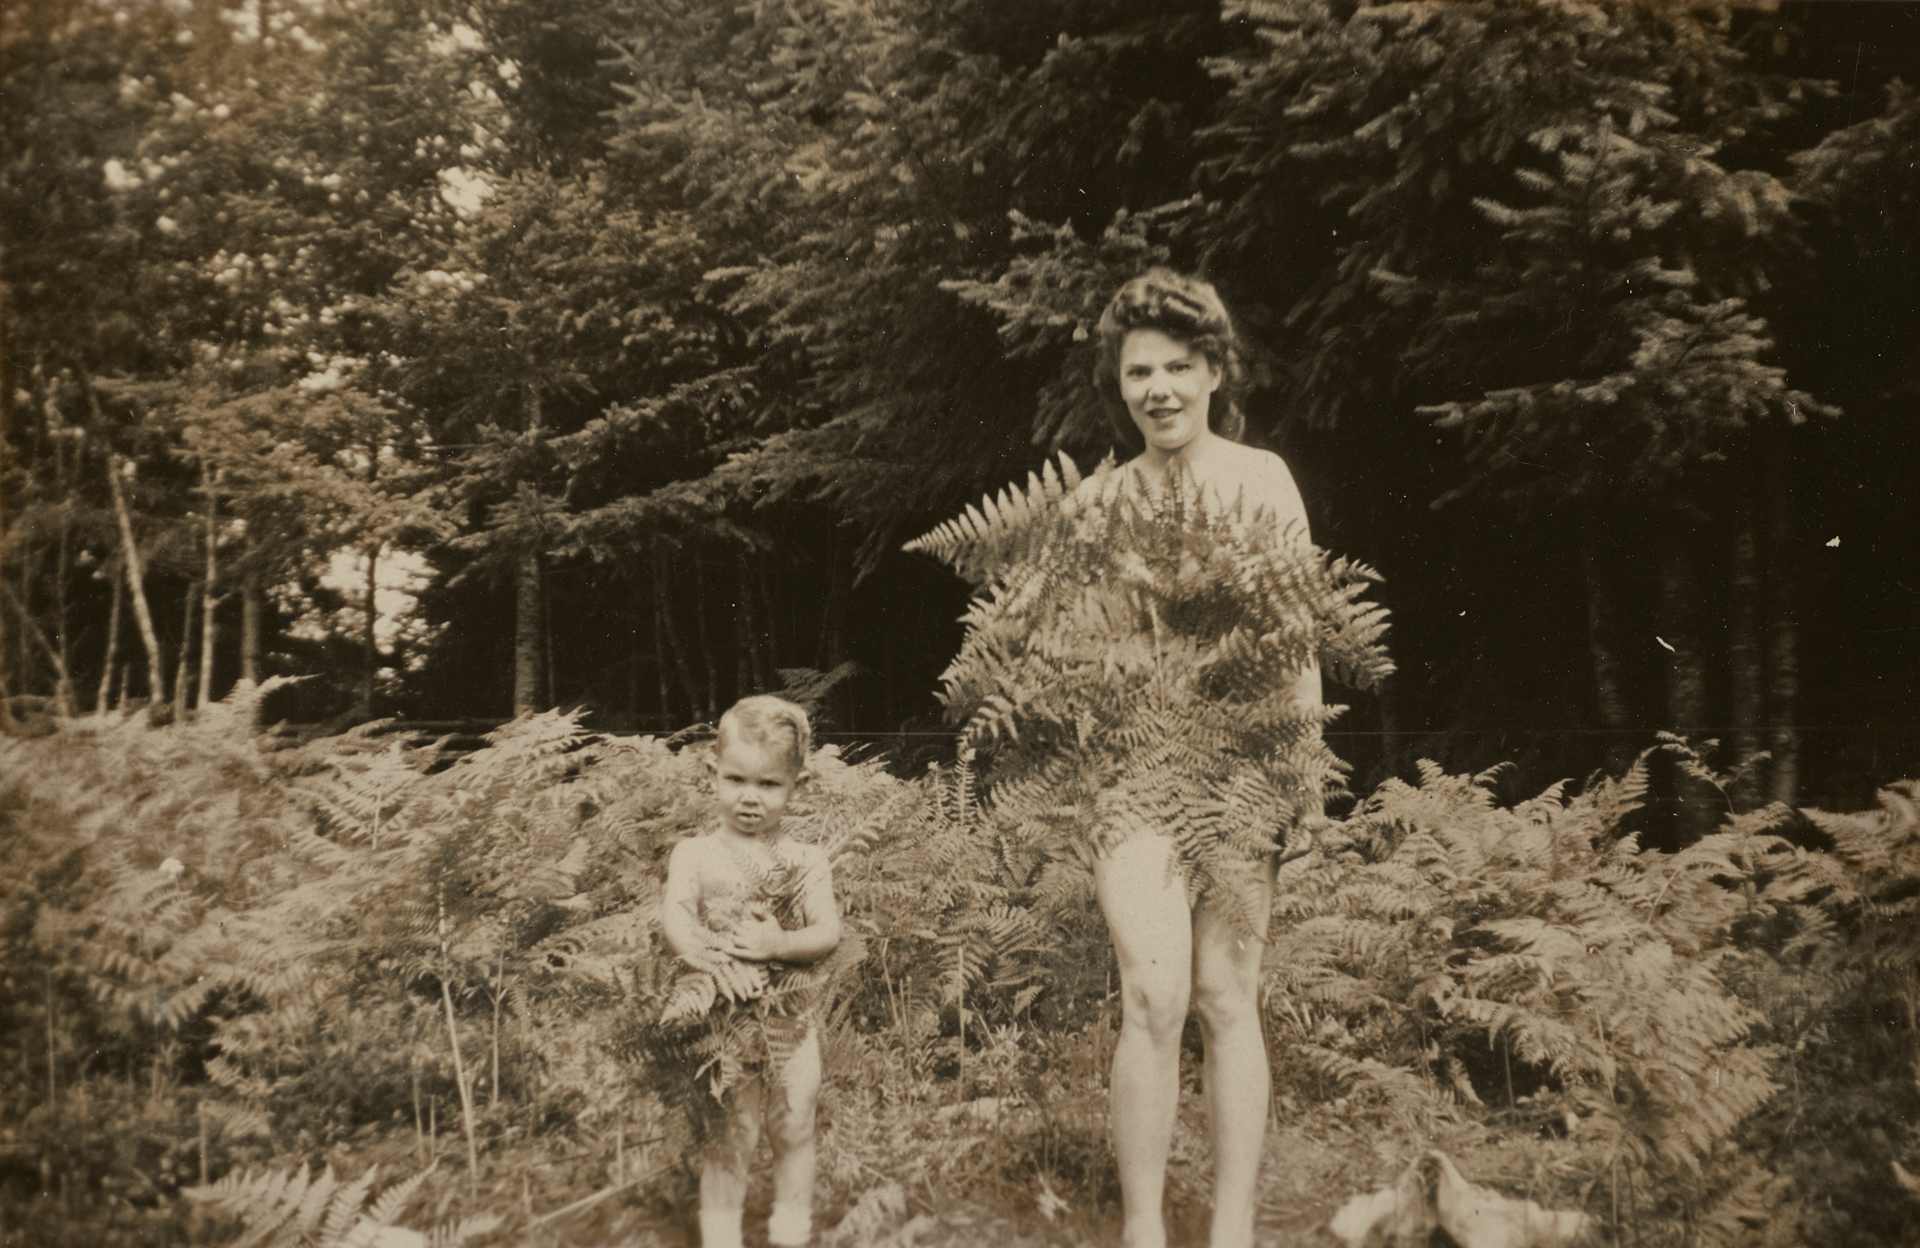 Snapshot of a light-skinned woman and young child standing naked in a bed of ferns at the edge of a forest. The woman smiles, both covering themselves with fern fronds.